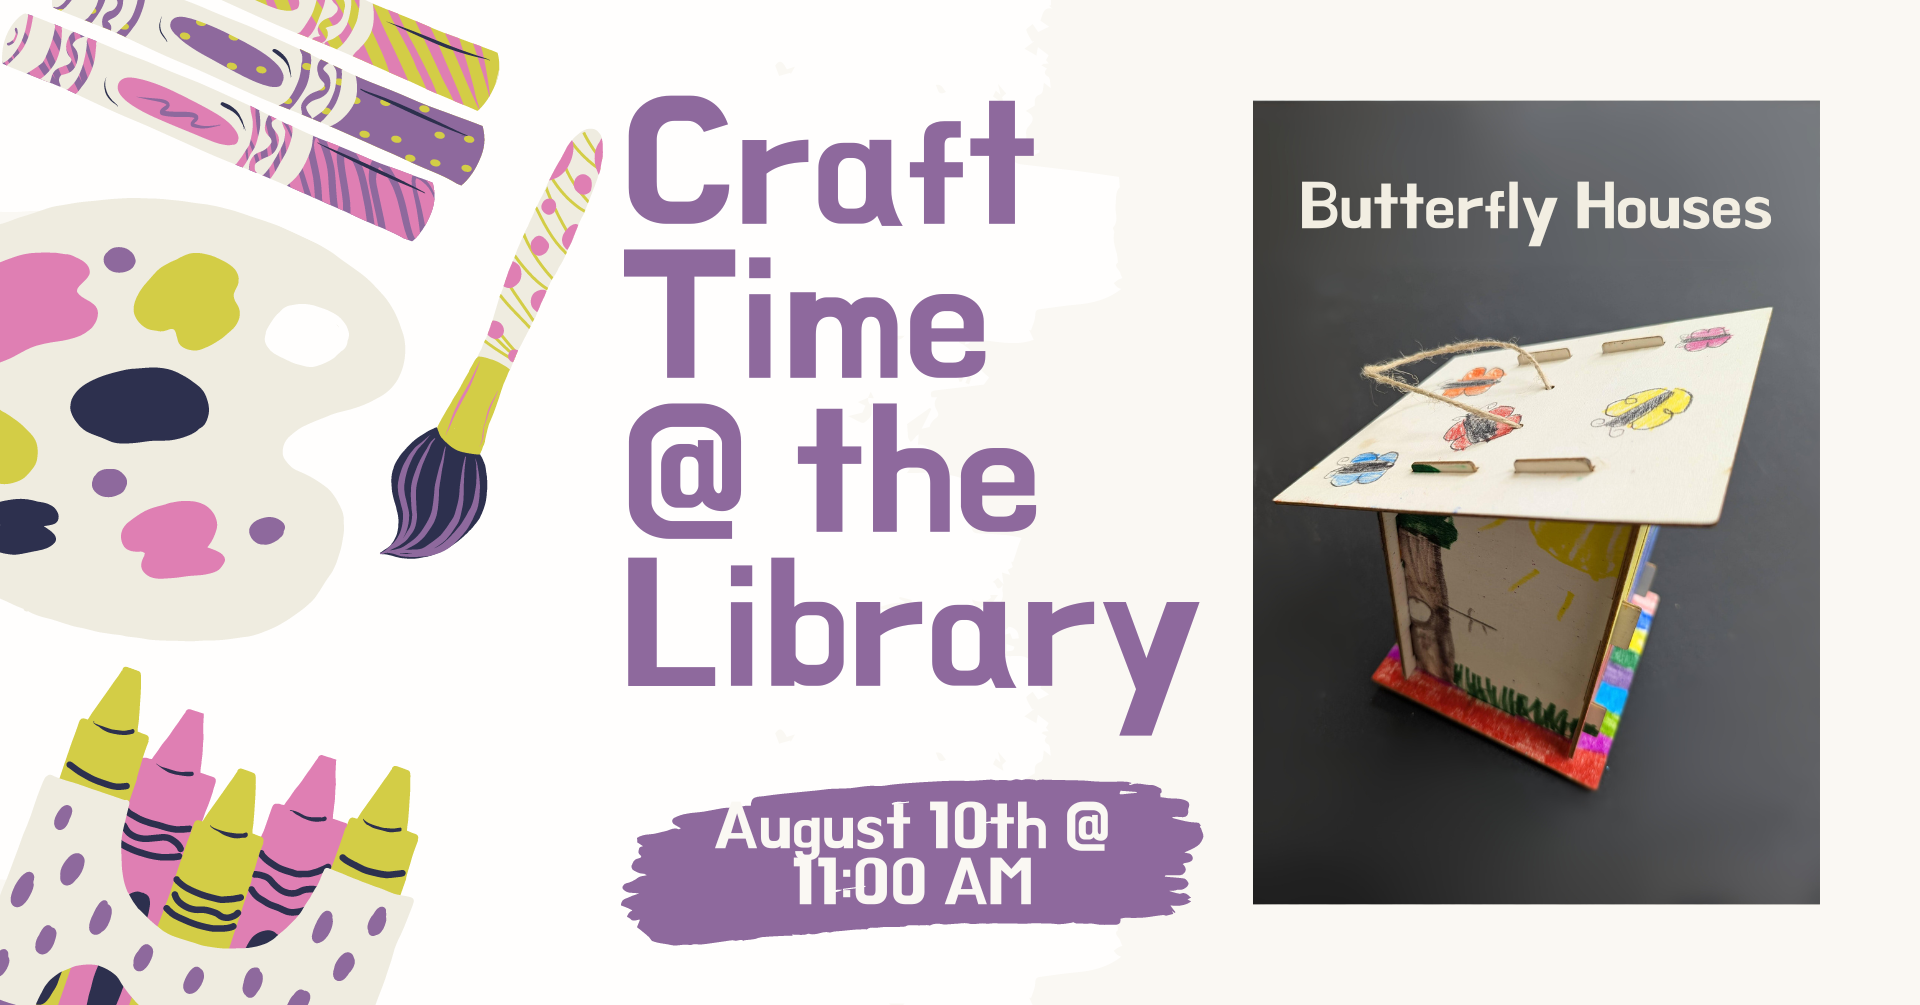 Craft Time @ the Library. August 10th @ 11:00AM. Butterfly Houses.